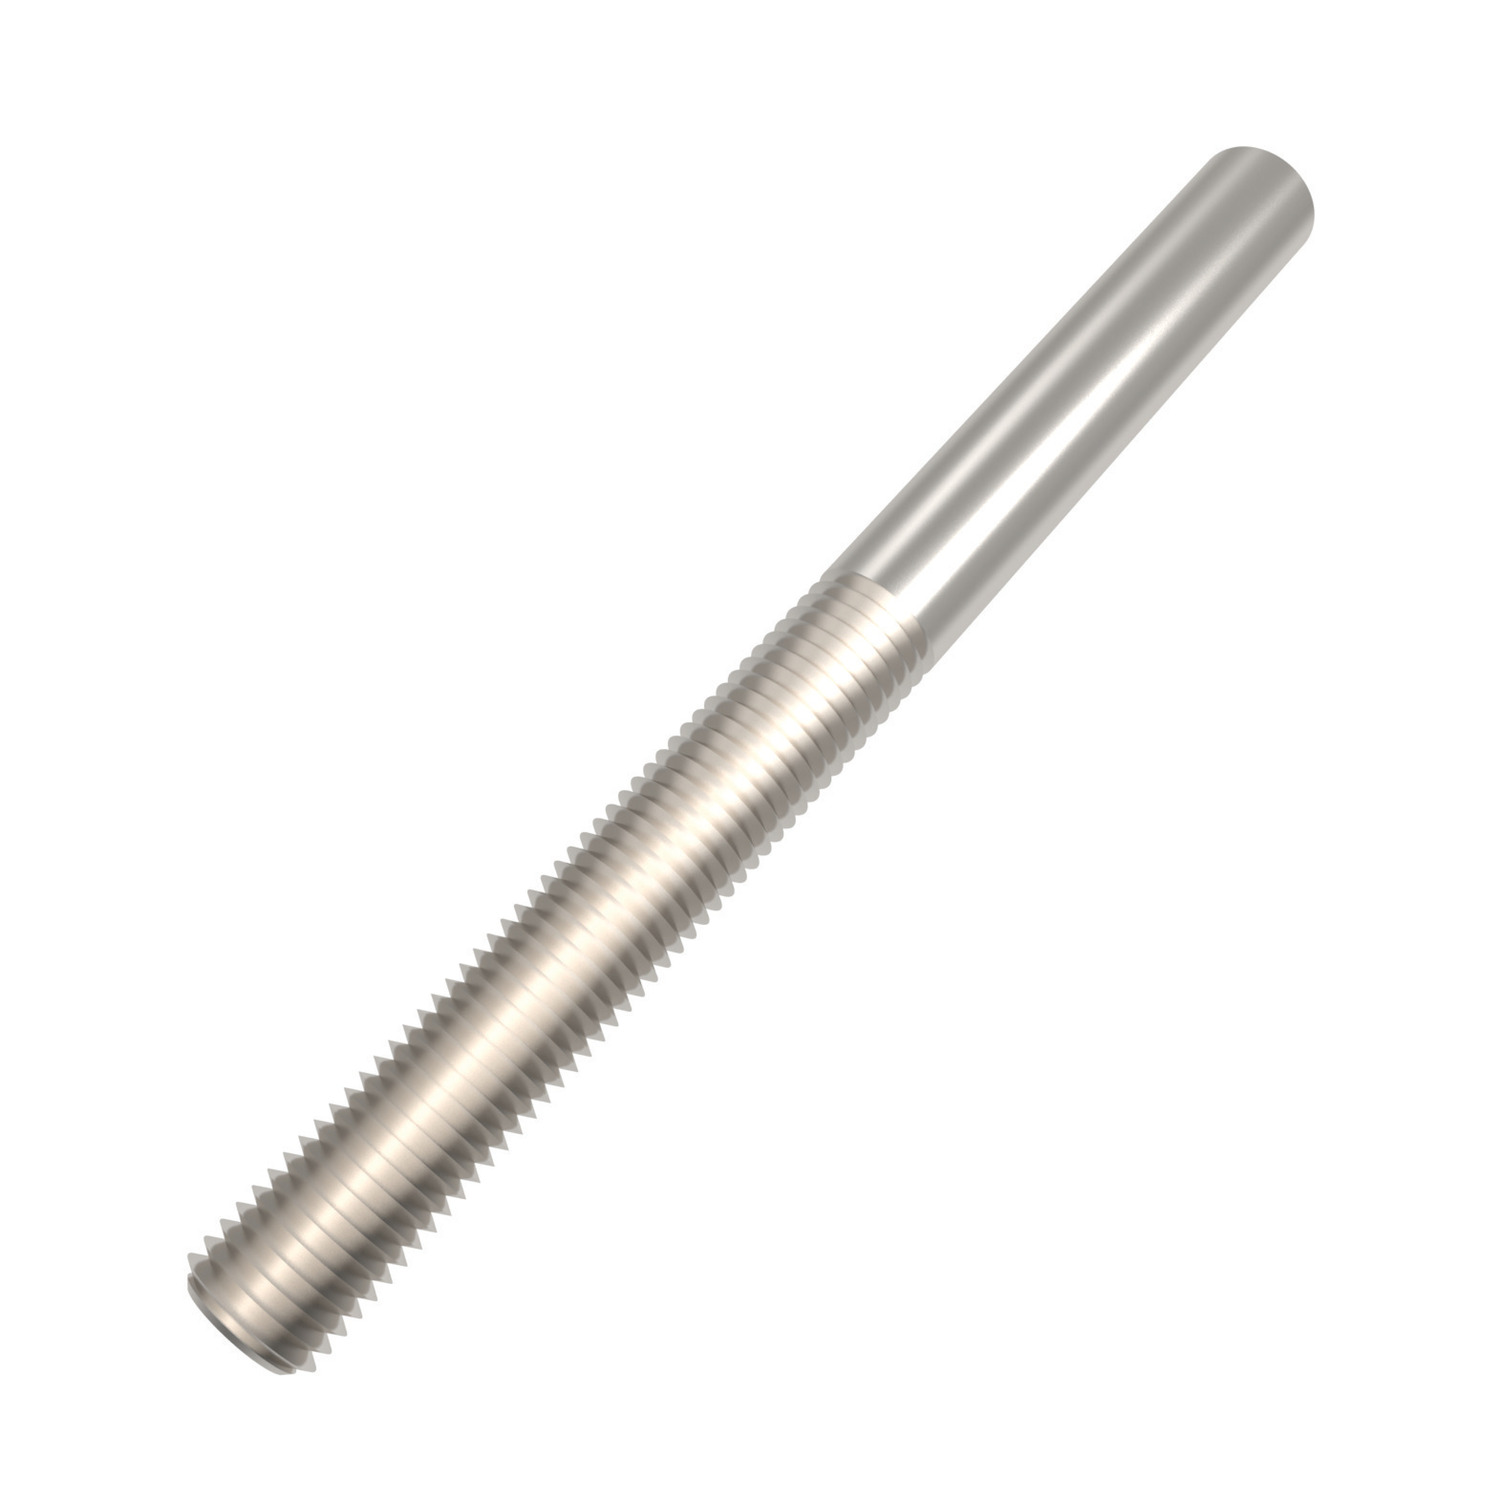 R3868.L014-A4 Welding Studs LH M14 A4 s/s Not to be used for lifting unless SWL marked.